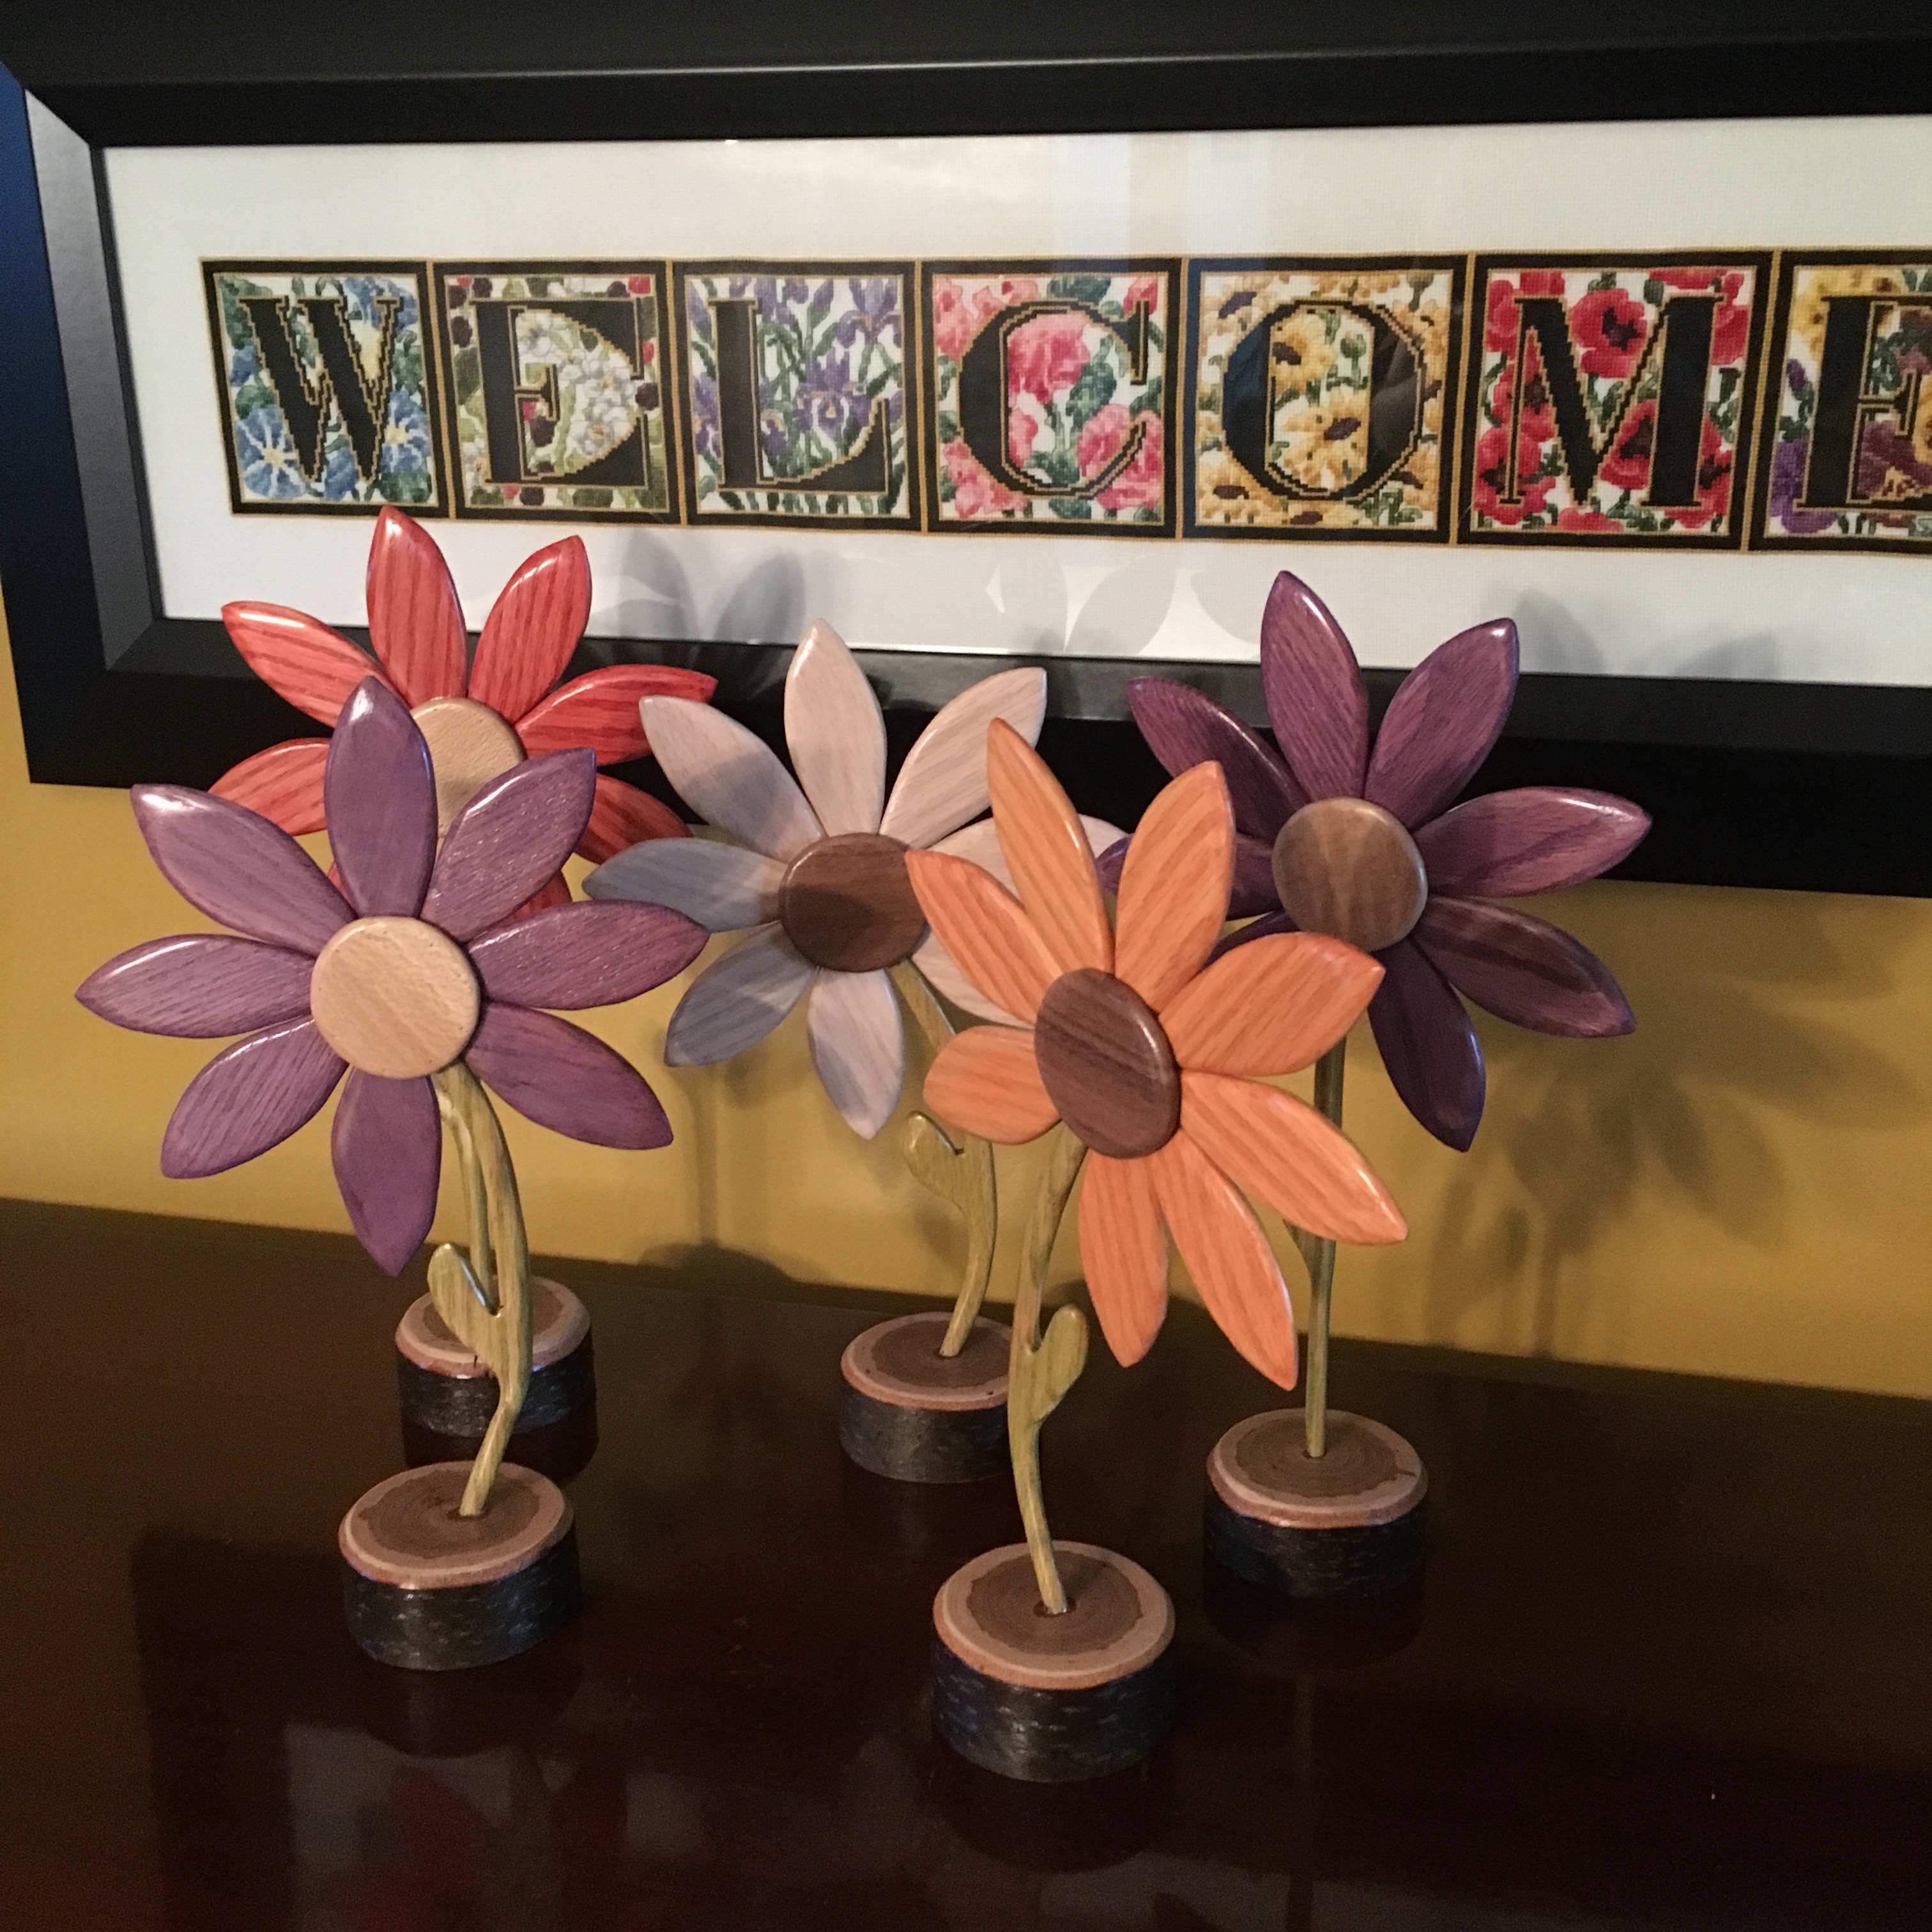 Painted wooden flowers